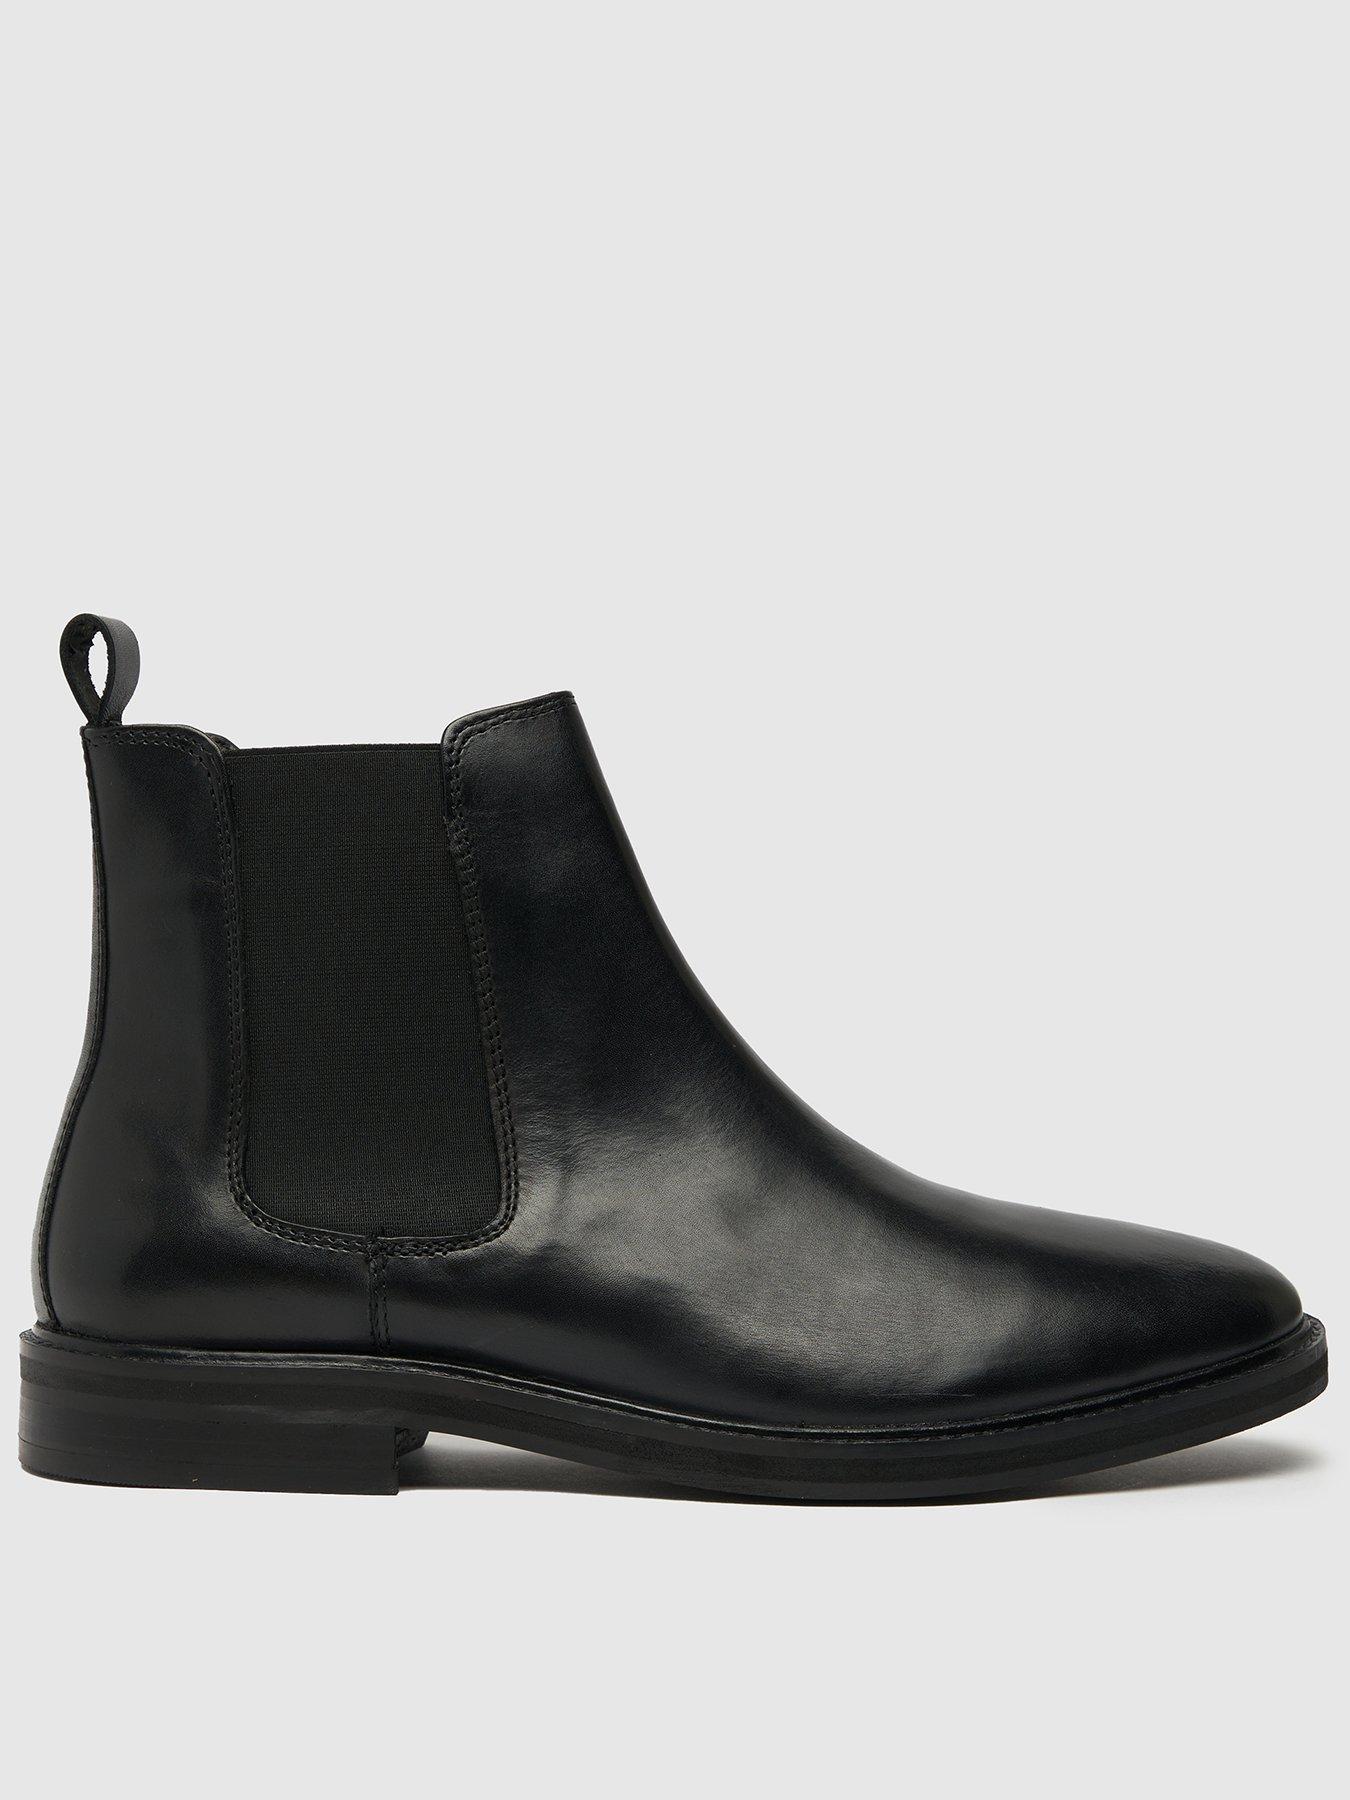 Schuh Dante Smart Leather Chelsea Boot | very.co.uk